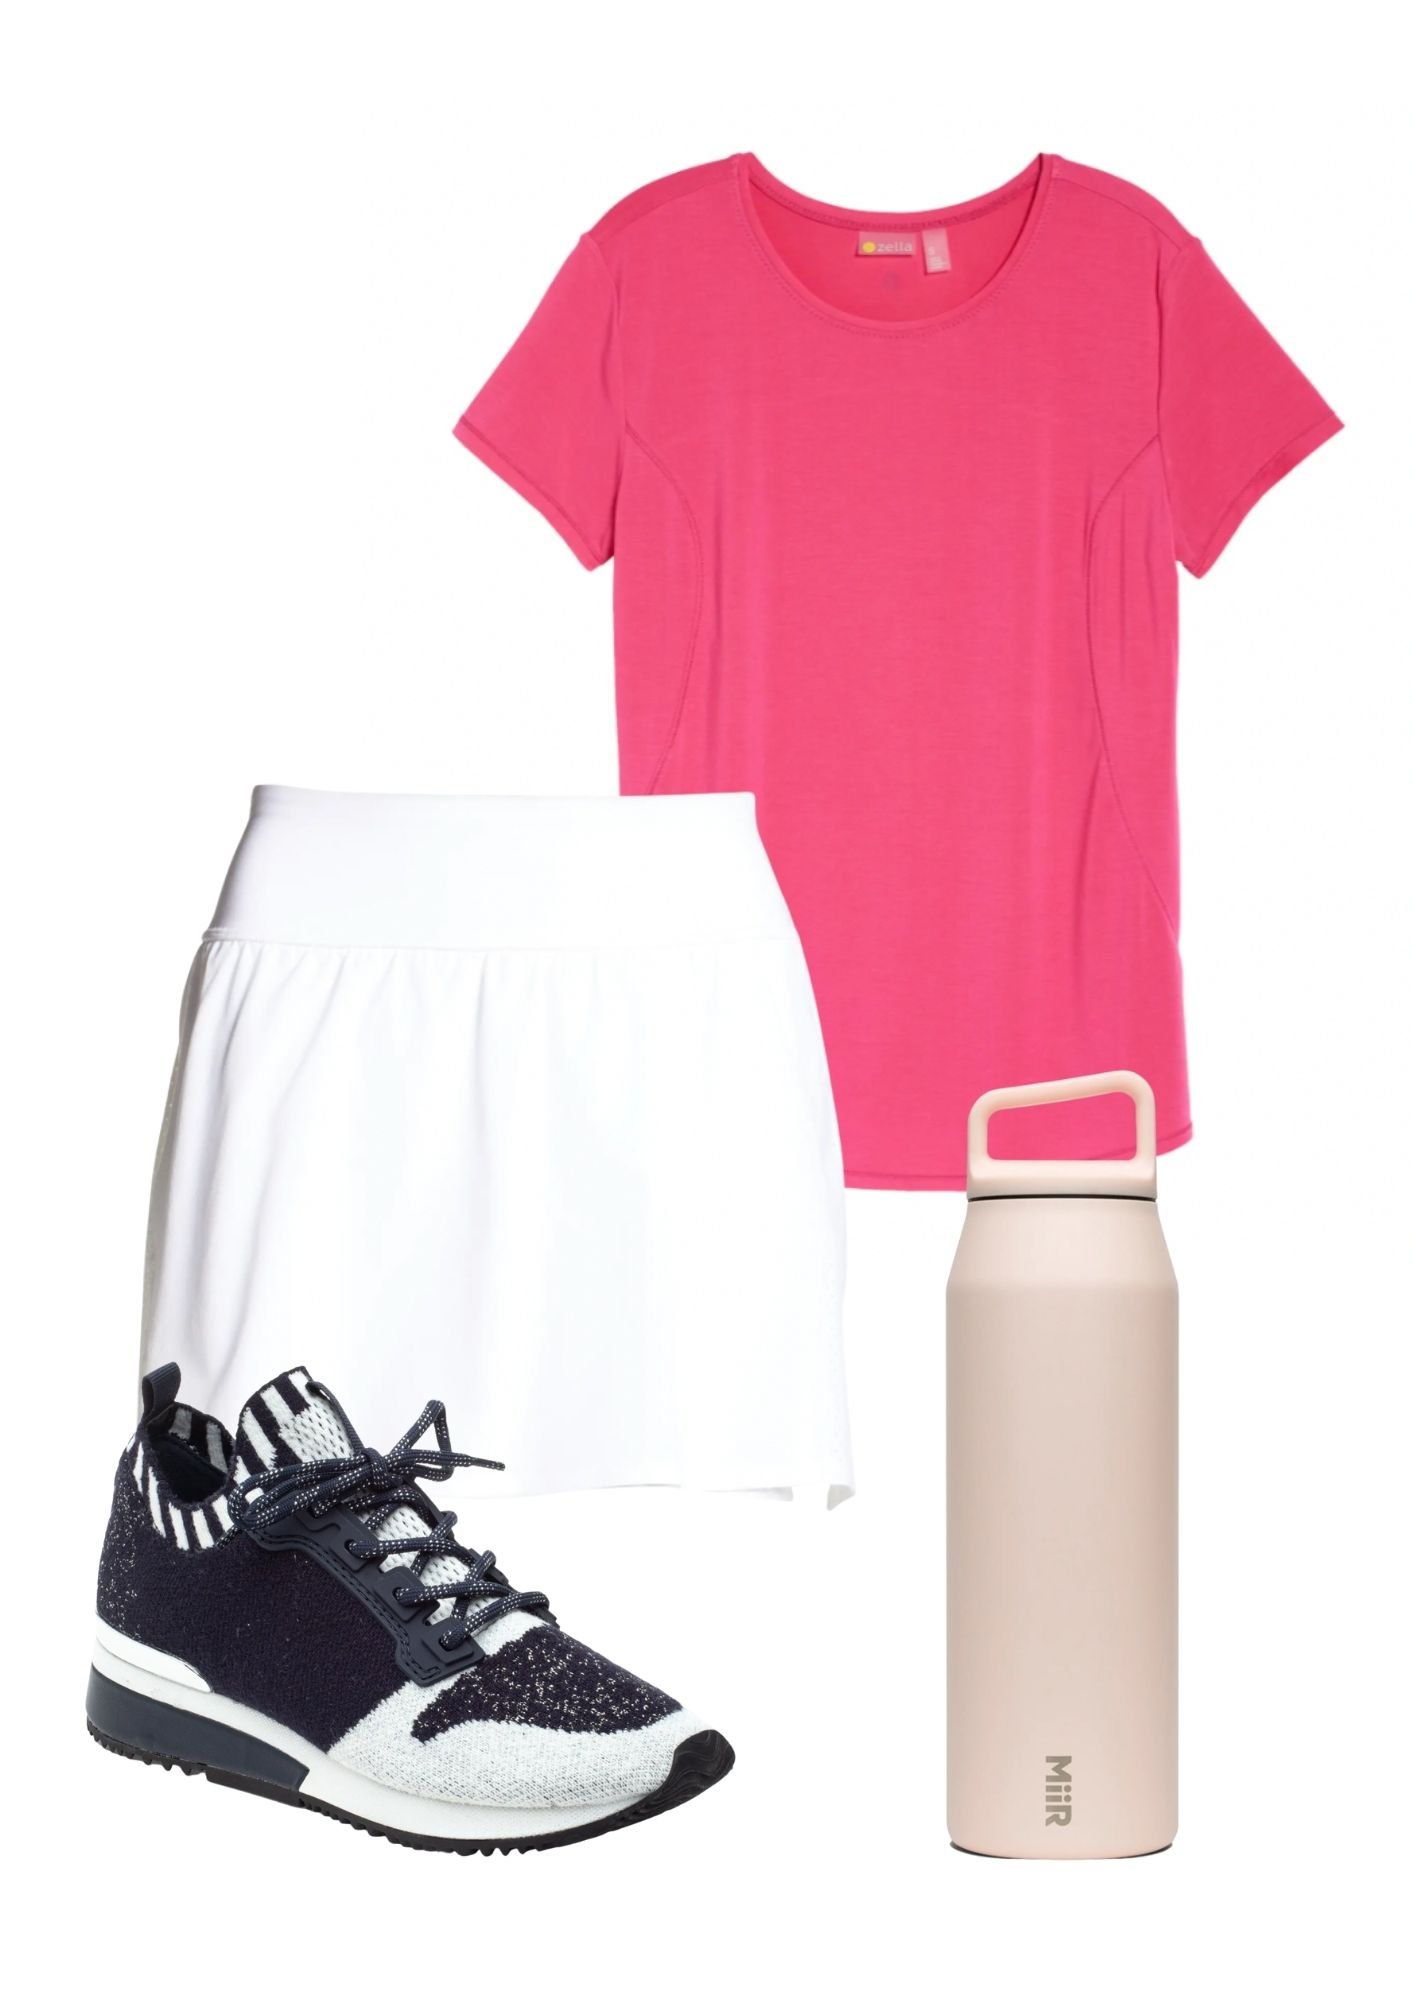 Cute Athleisure Outfit Ideas for warm weather